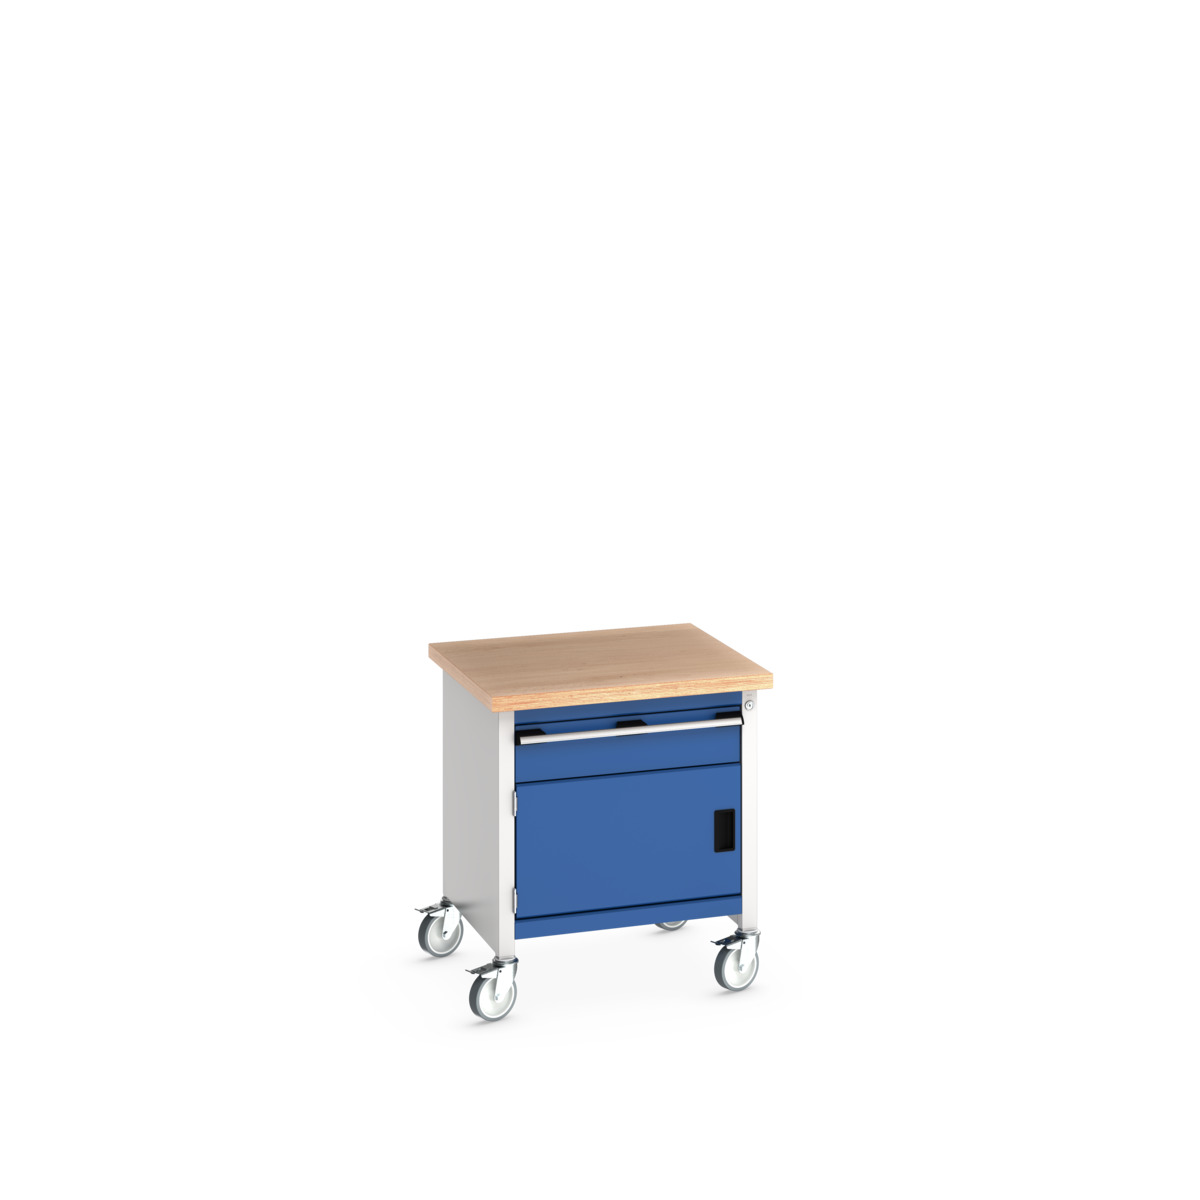 41002088.11V - cubio mobile storage bench (mpx)